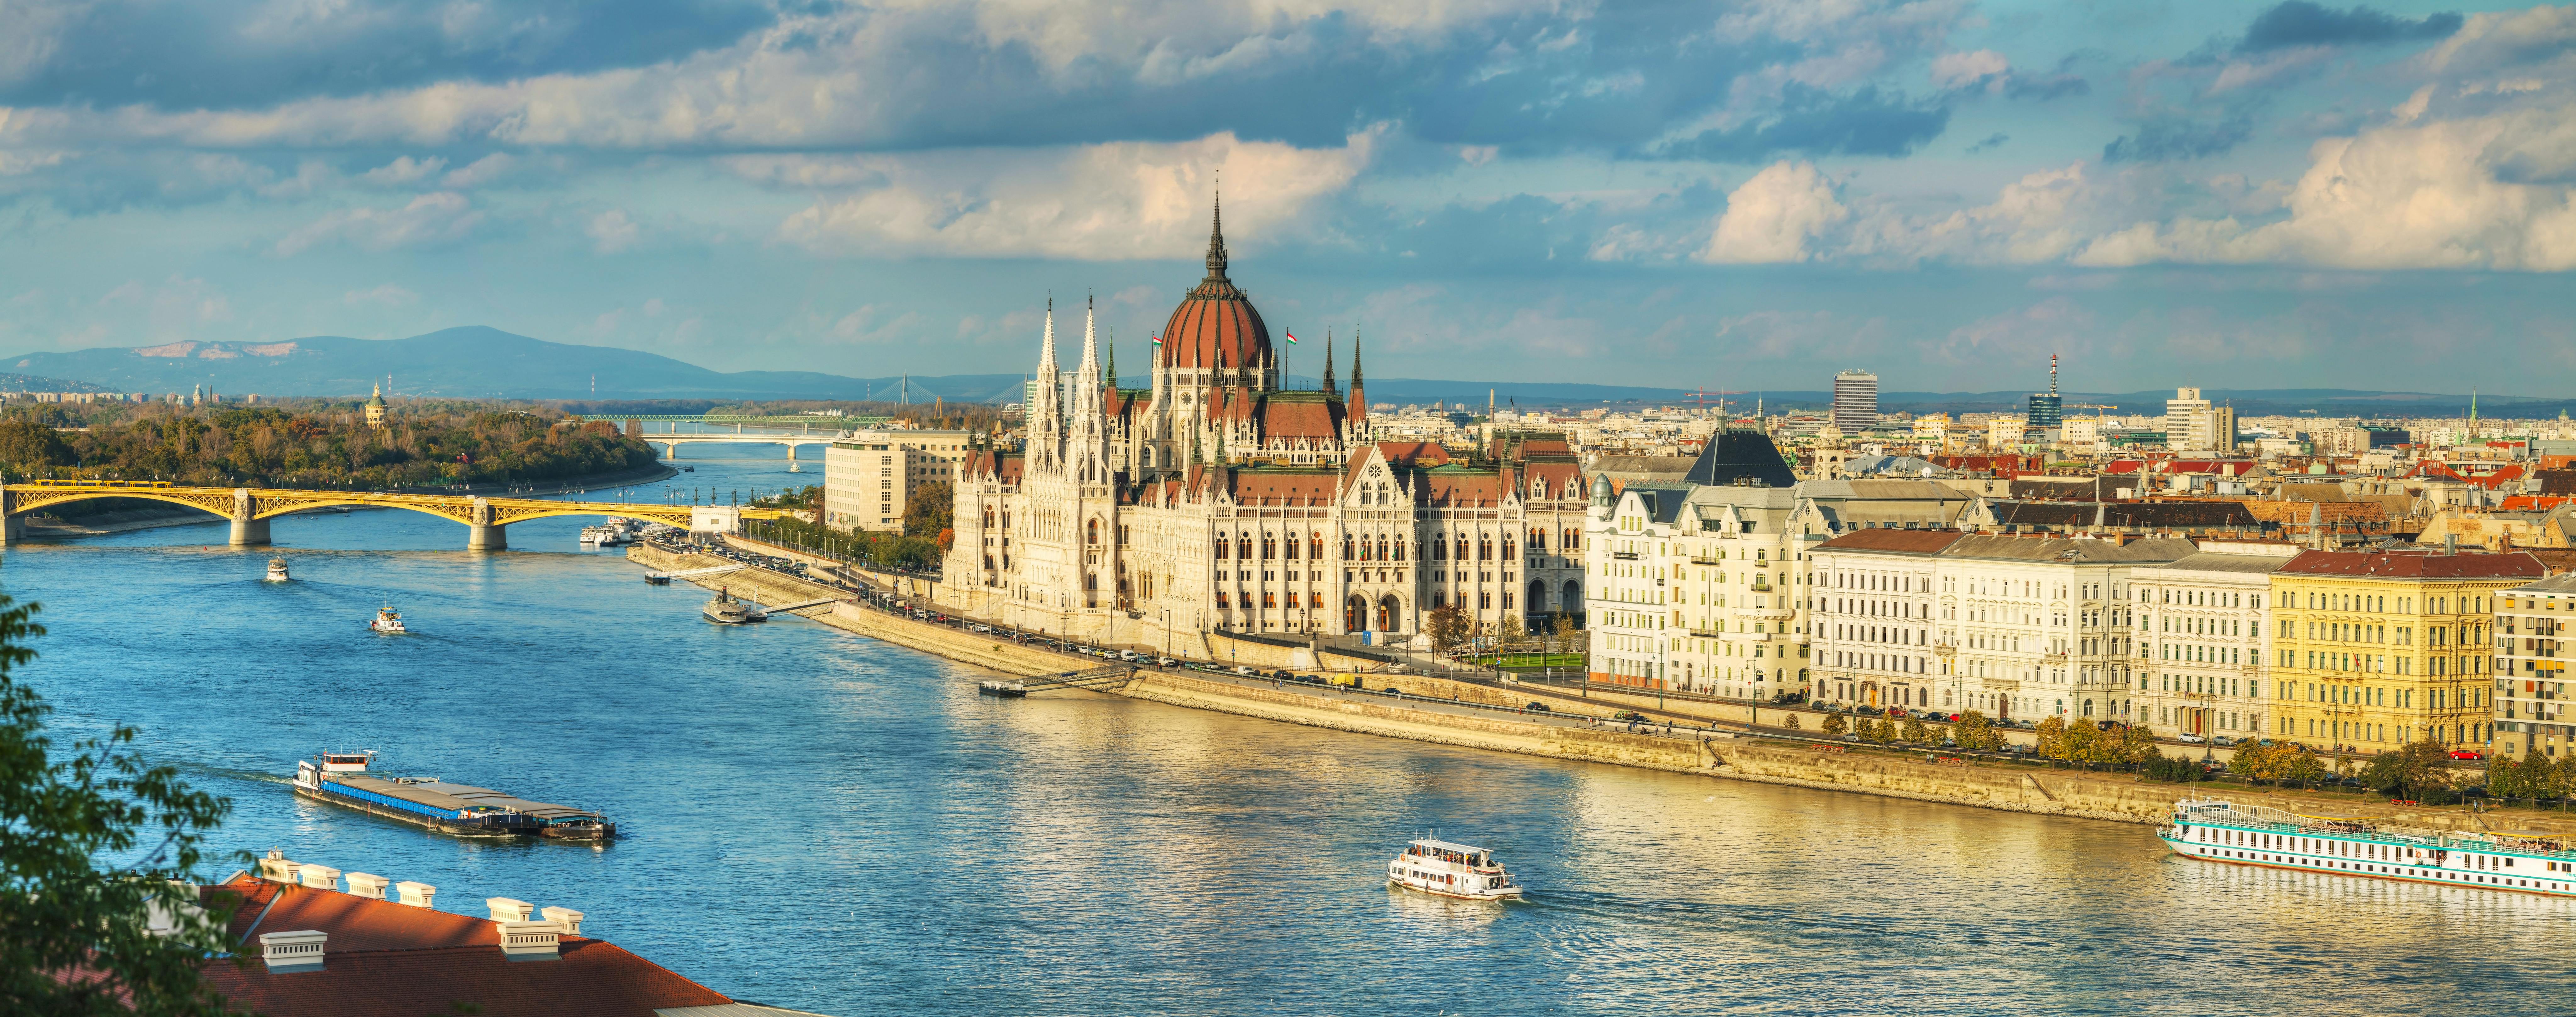 Private boat tour in Budapest on the river Danube Musement